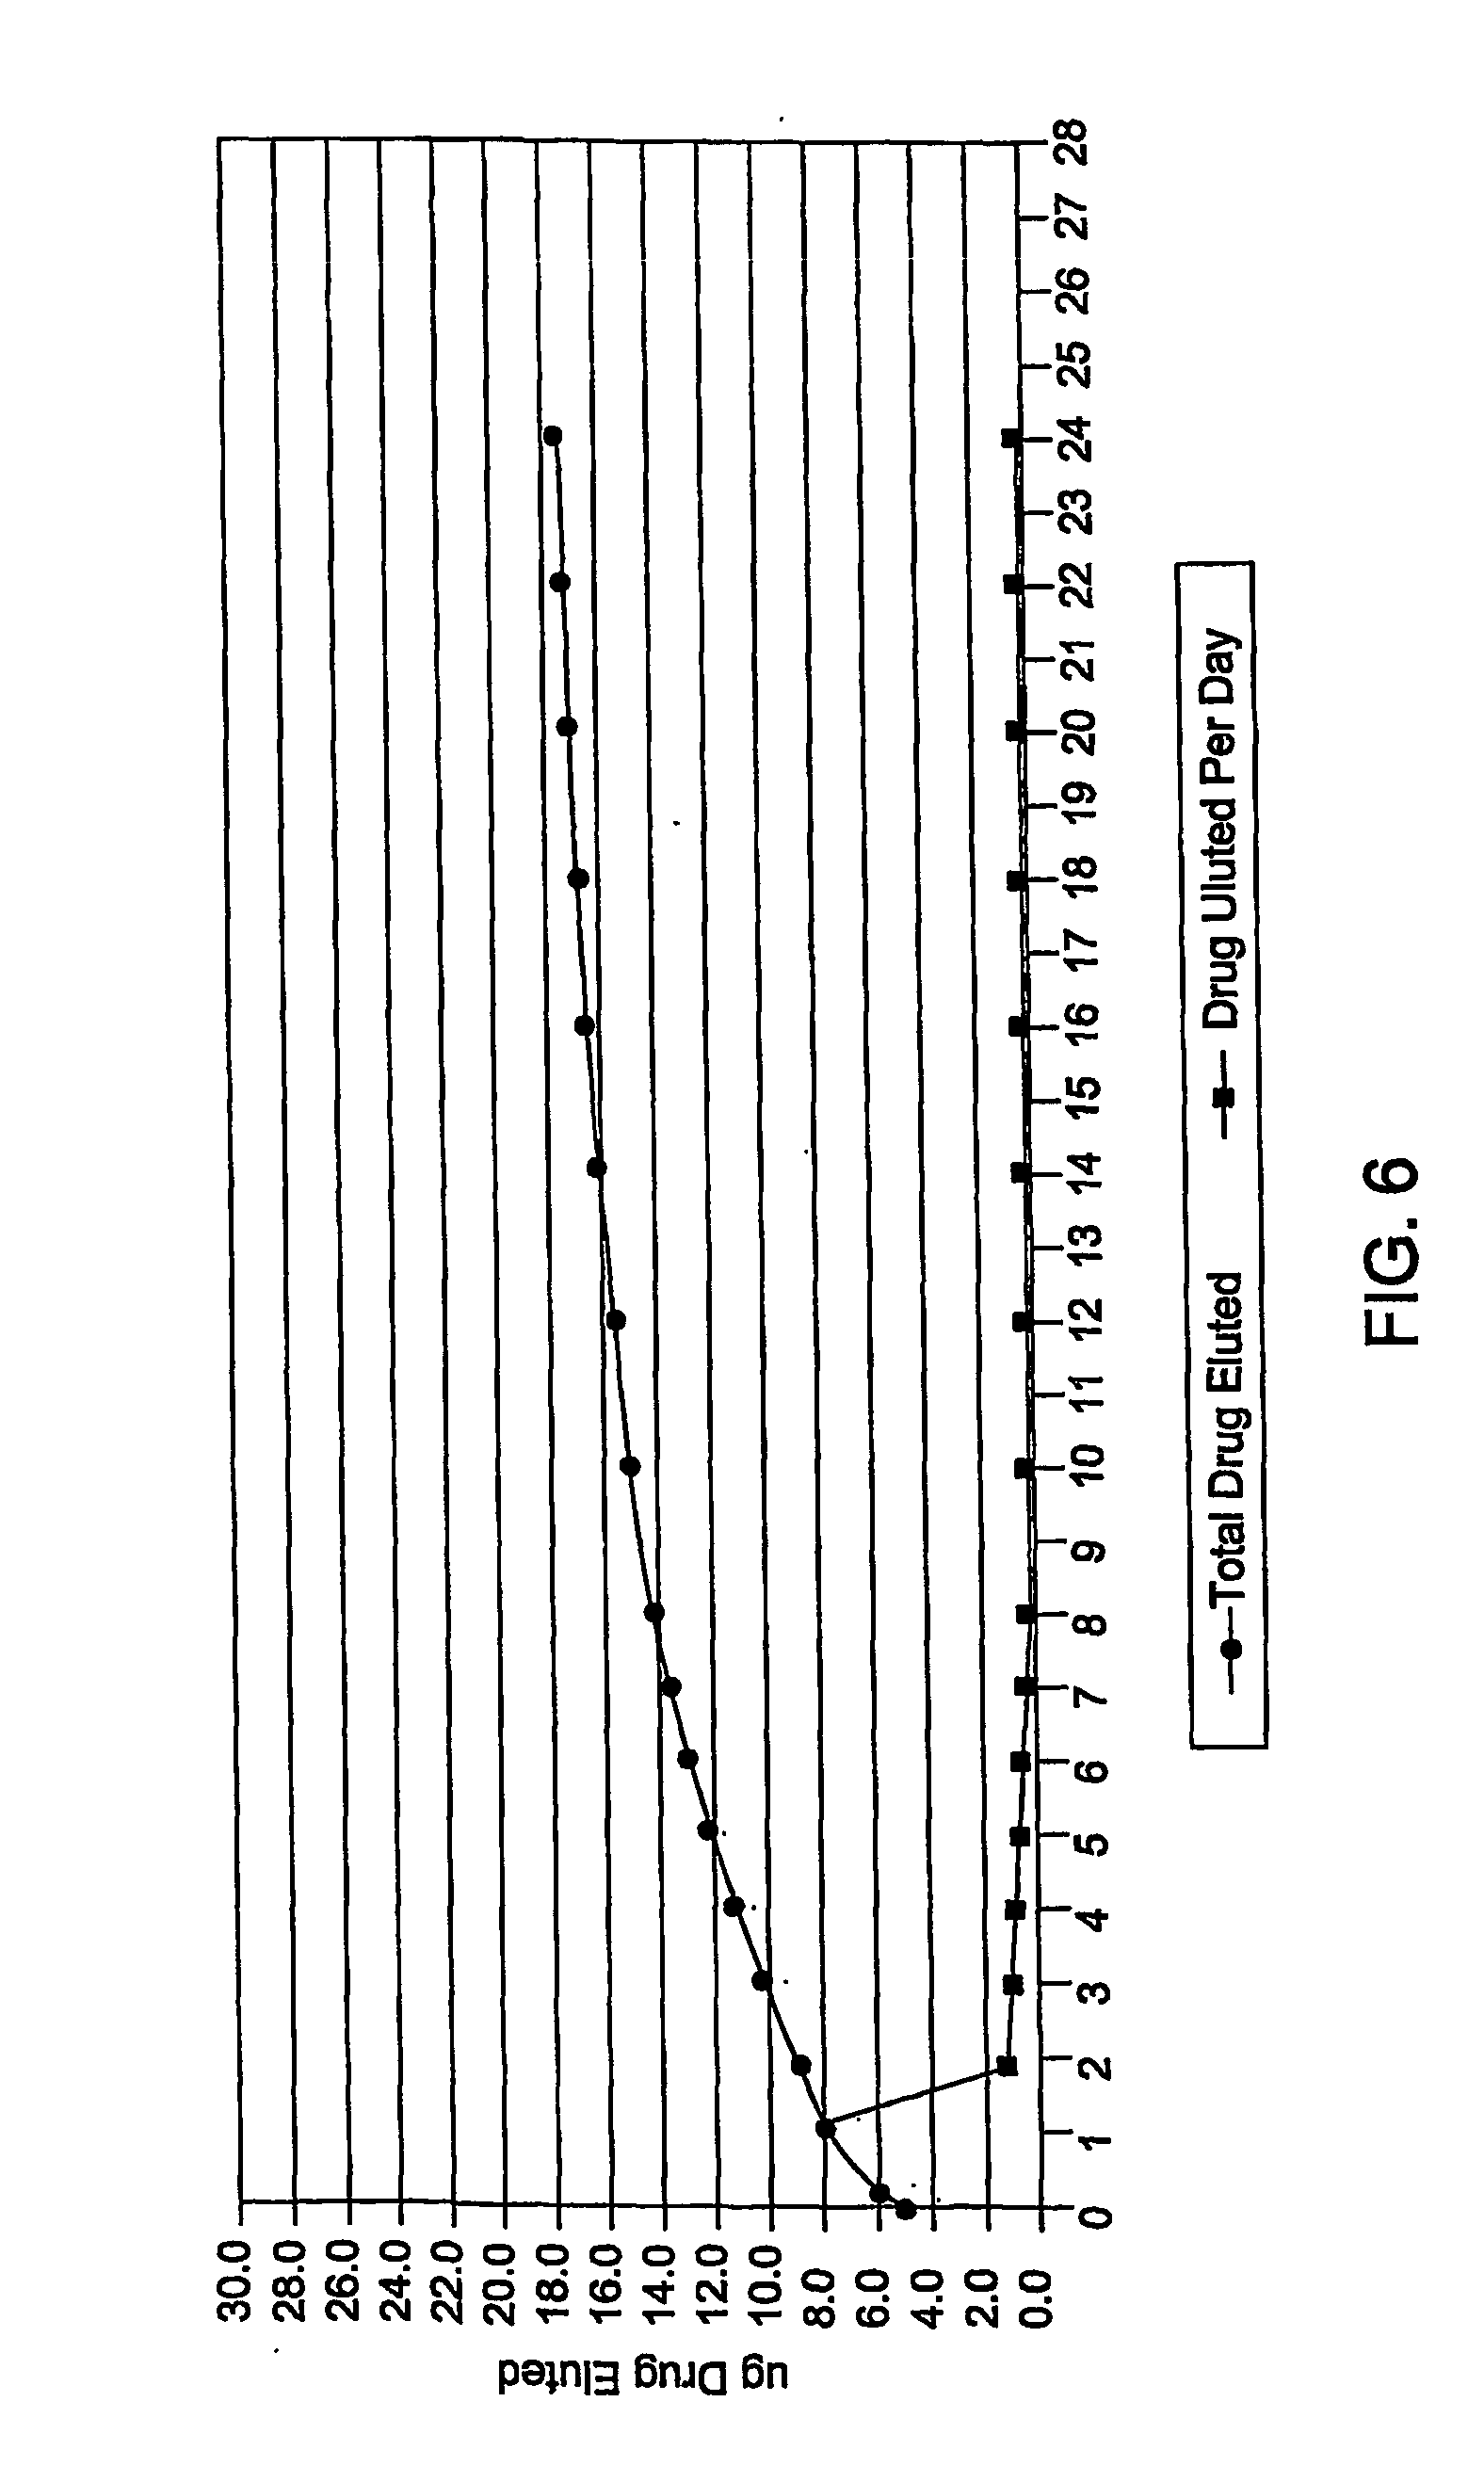 Medical devices with proteasome inhibitors for the treatment of restenosis